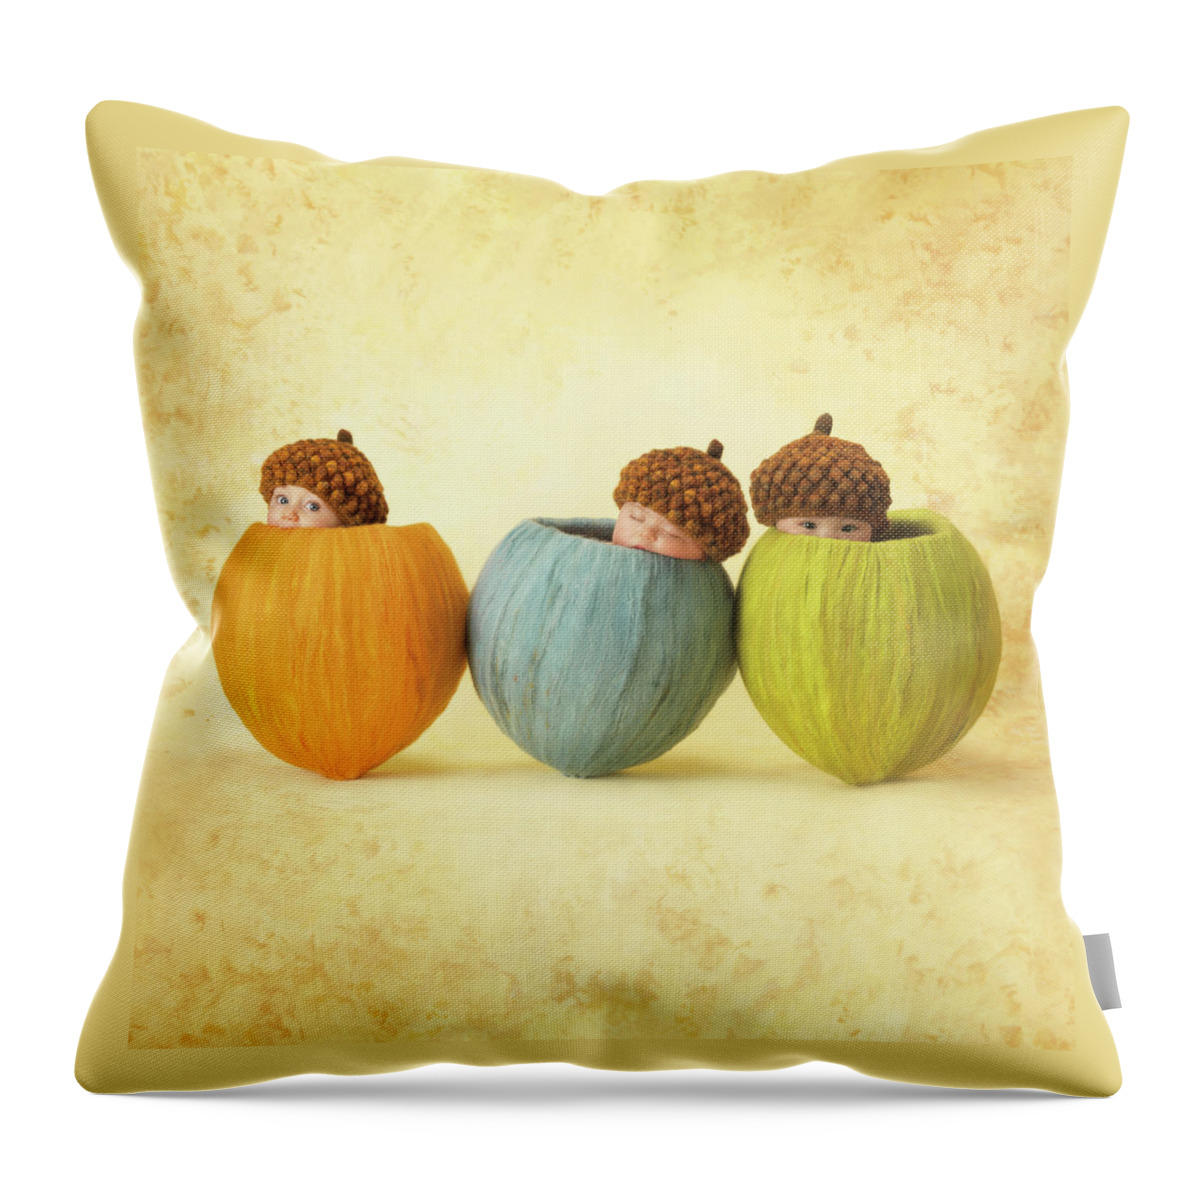 Acorns Throw Pillow featuring the photograph Three Little Acorns by Anne Geddes